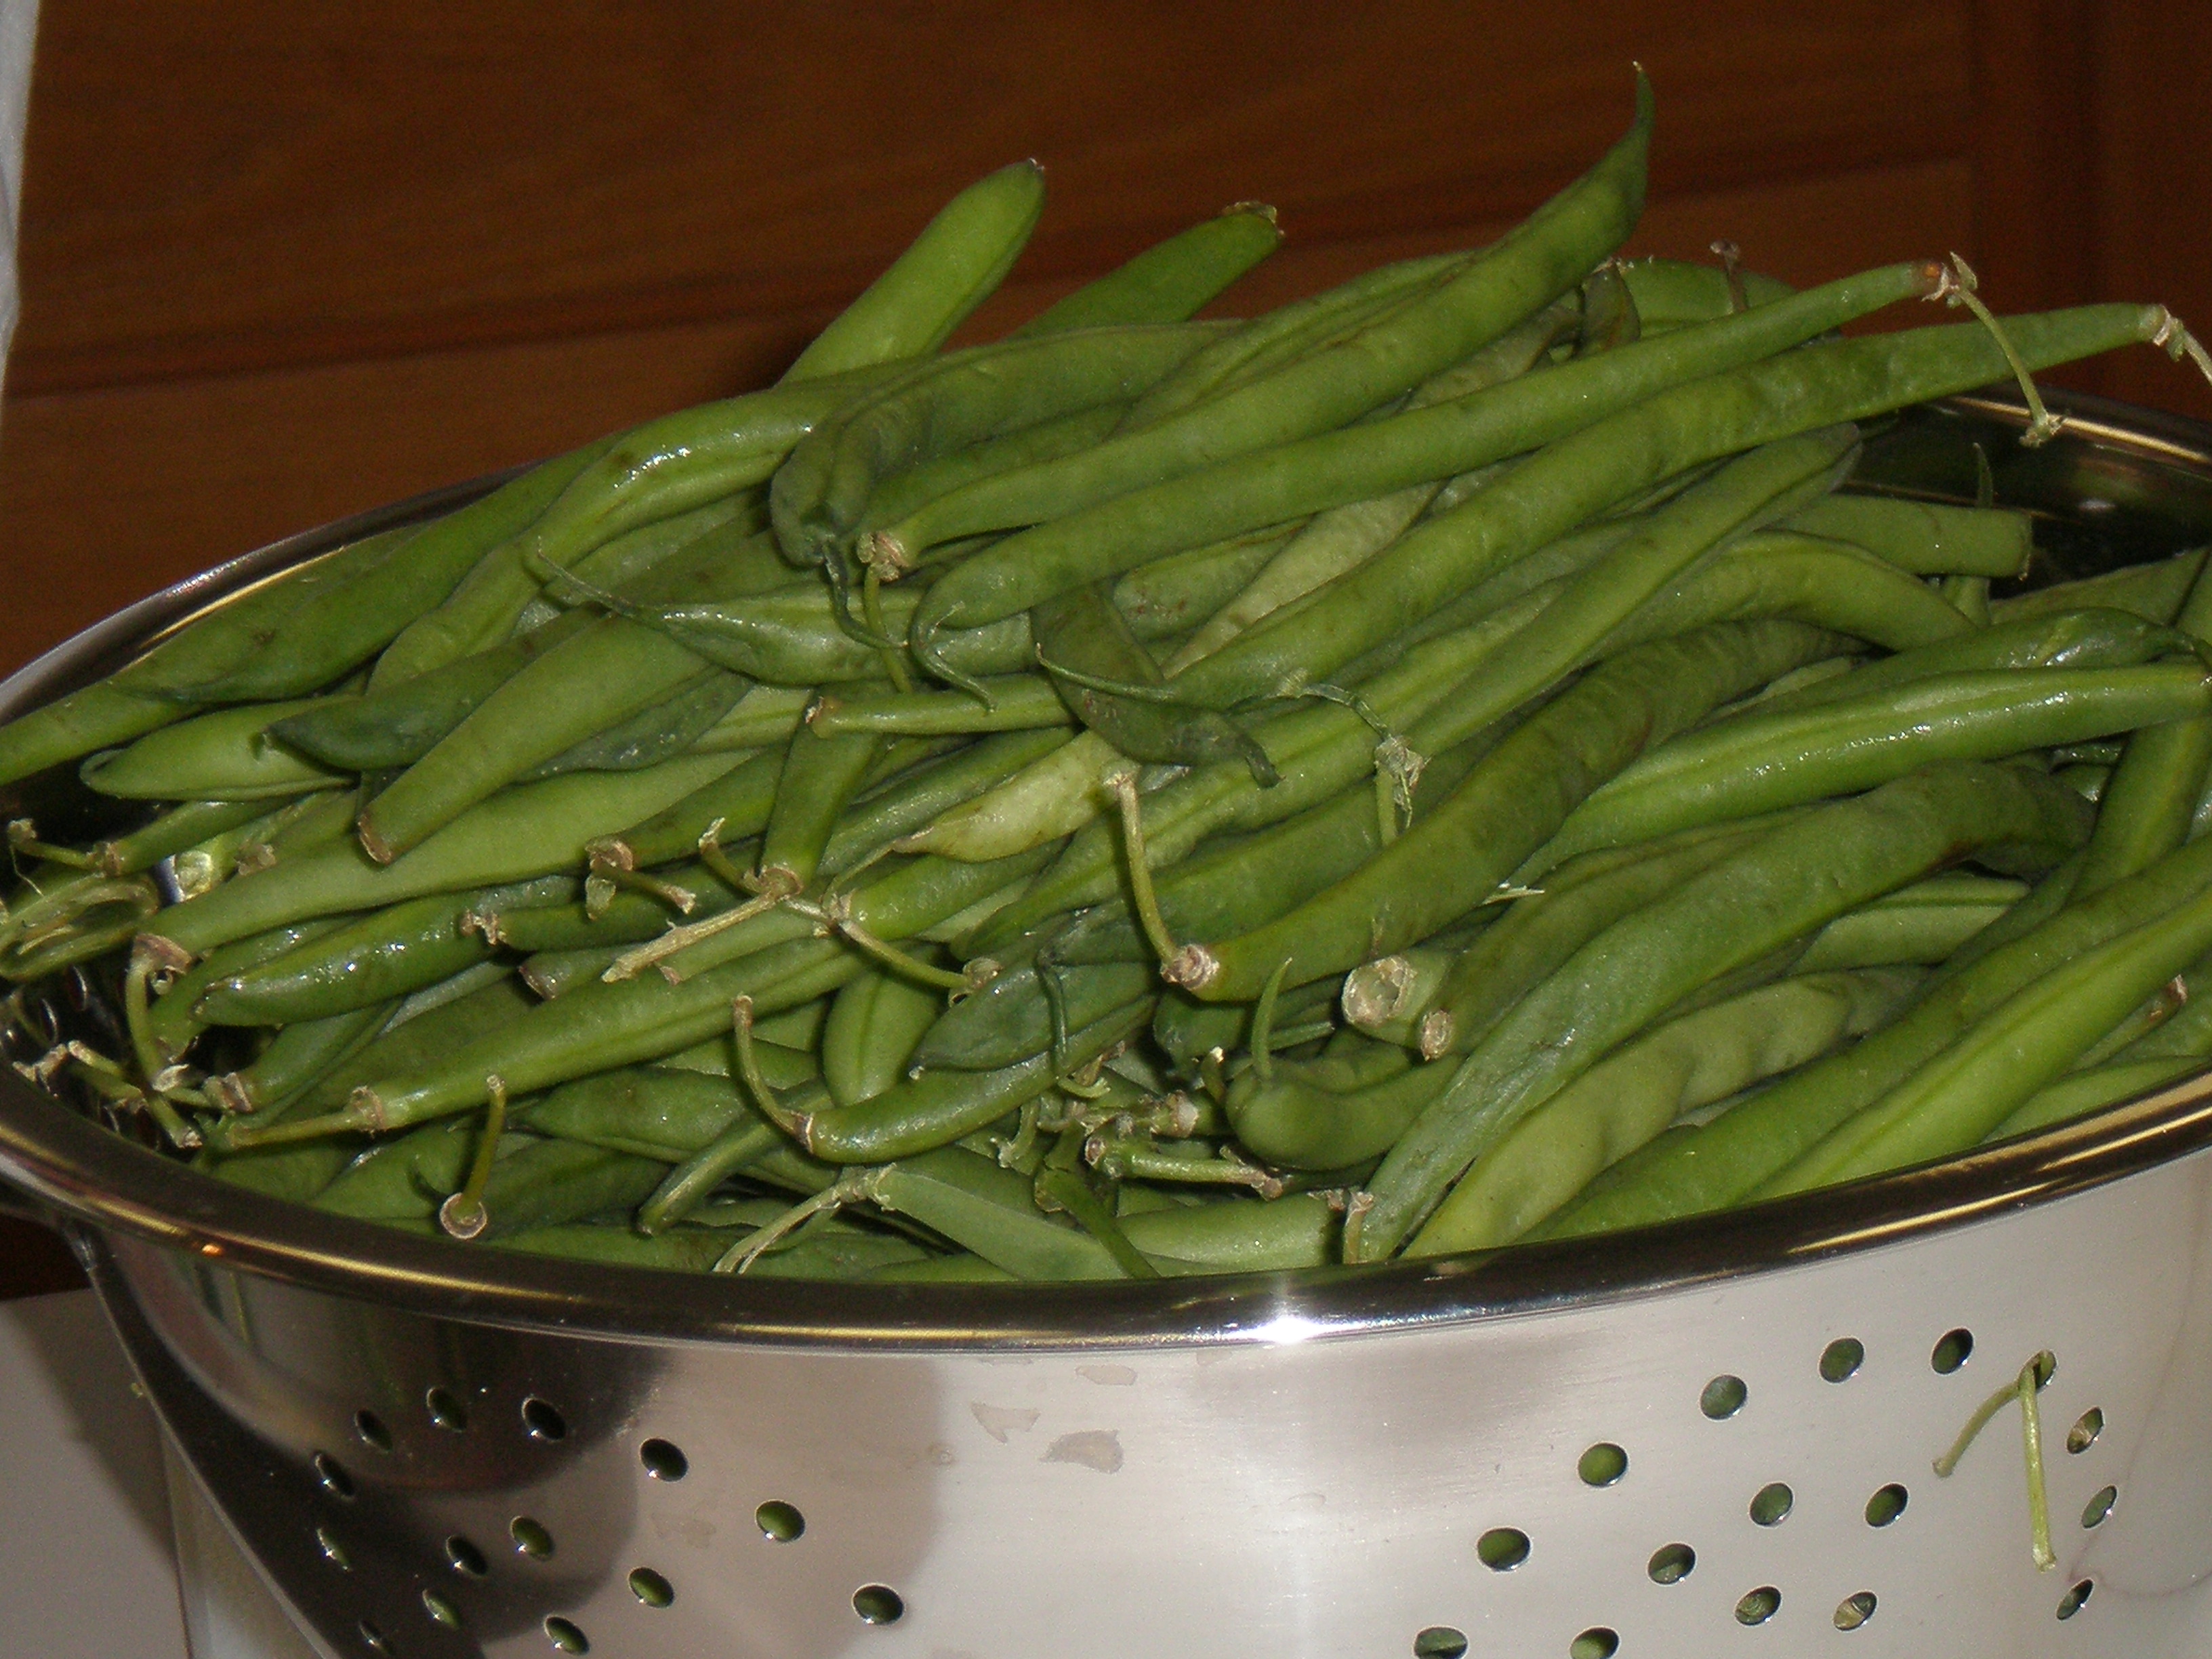 ... beans â€“ blanching times vary slightly between Green, Snap, or Wax